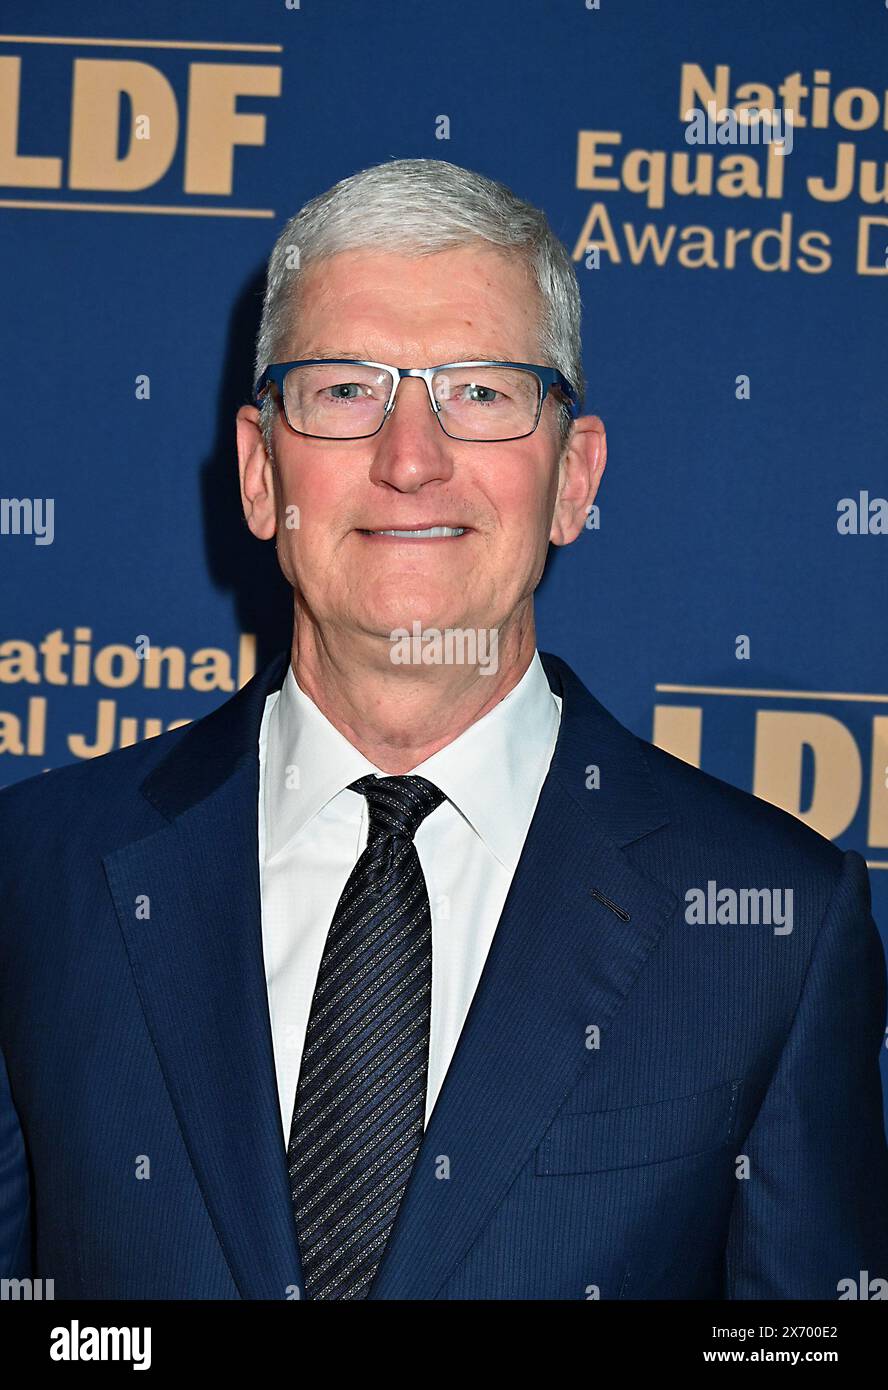 Tim Cook attends the LDF at National Equal Justice Awards Dinner at The ...